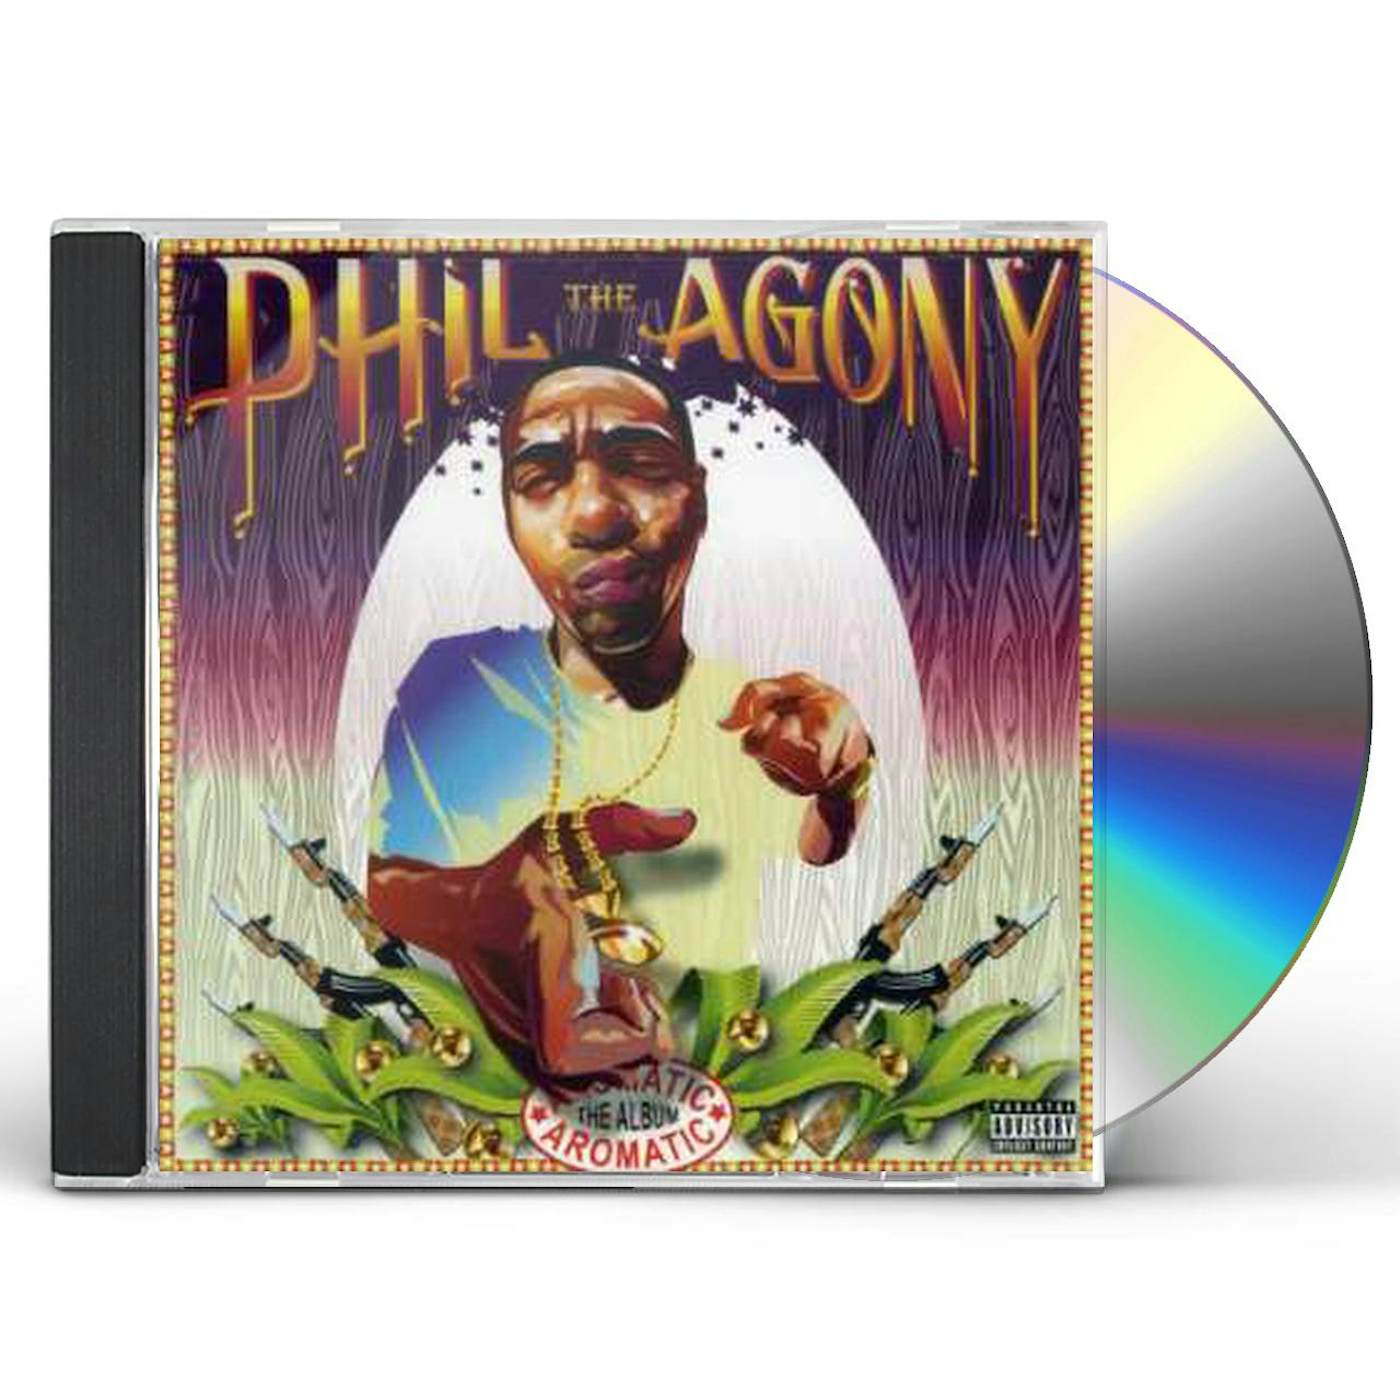 Phil The Agony AROMATIC CD